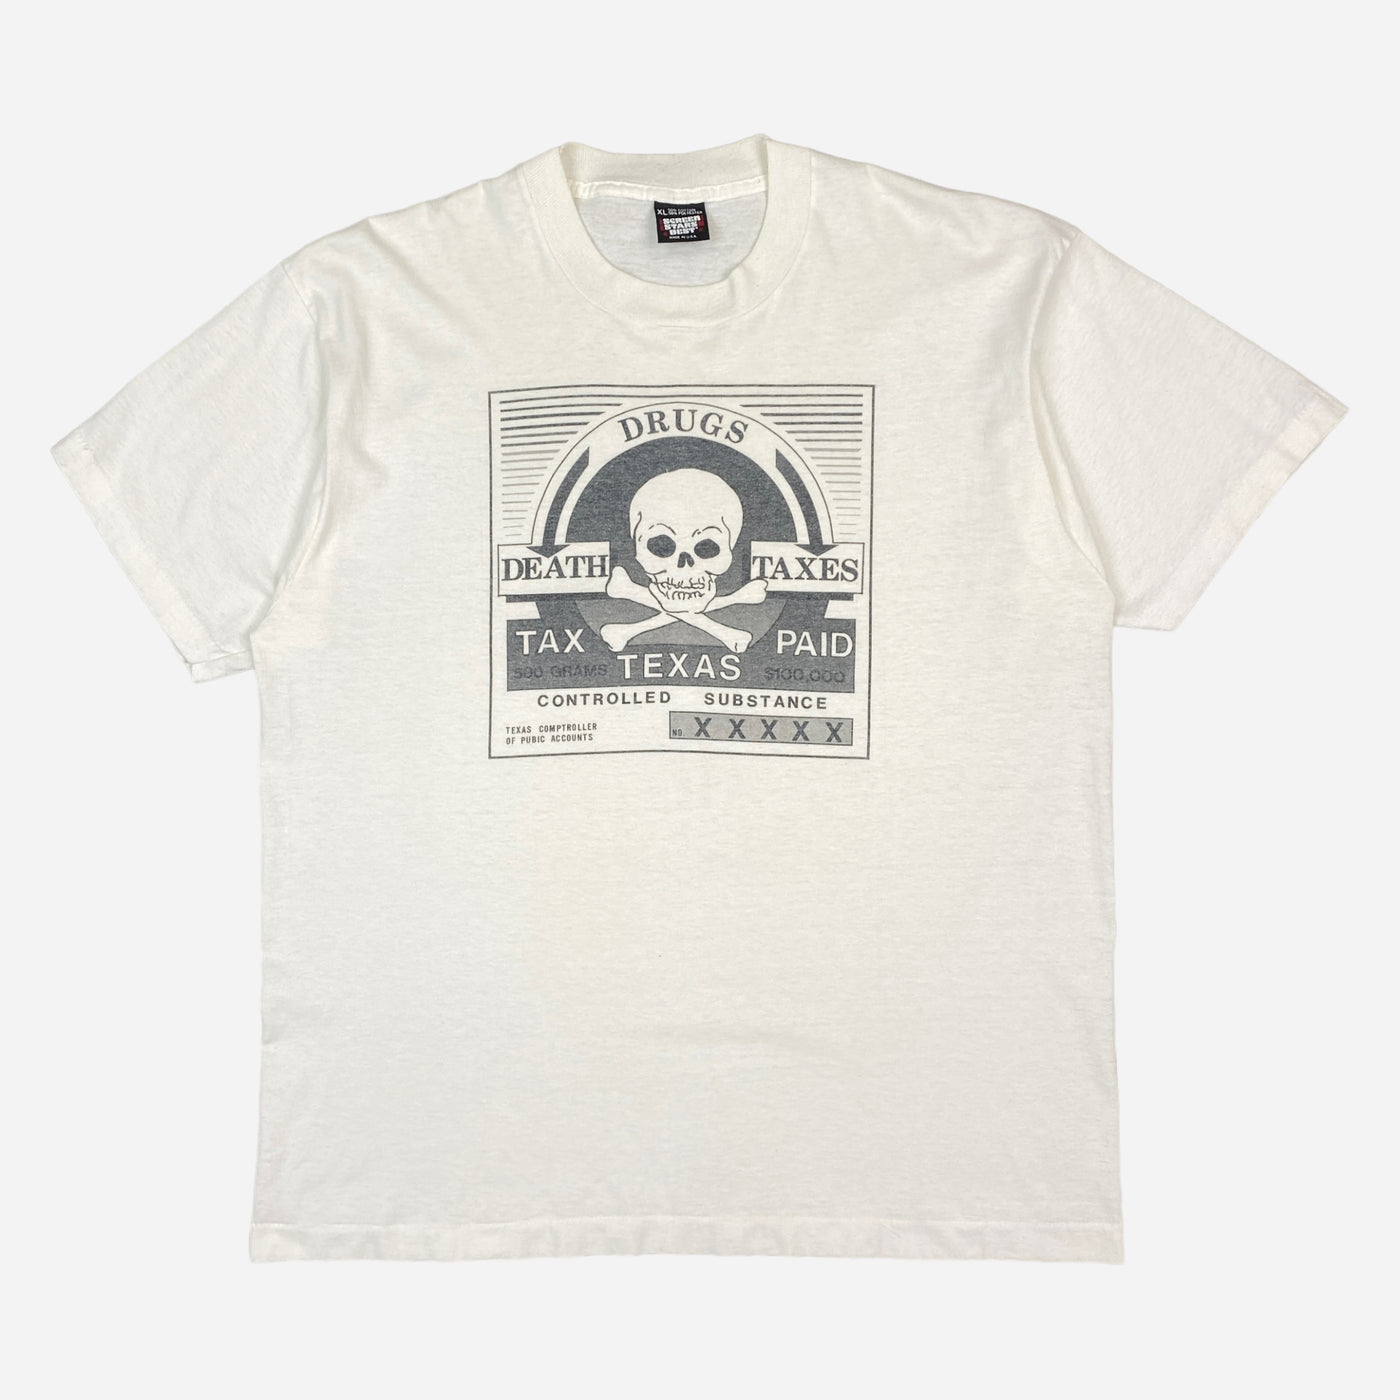 EARLY 90S DRUGS DEATH TAXES T-SHIRT